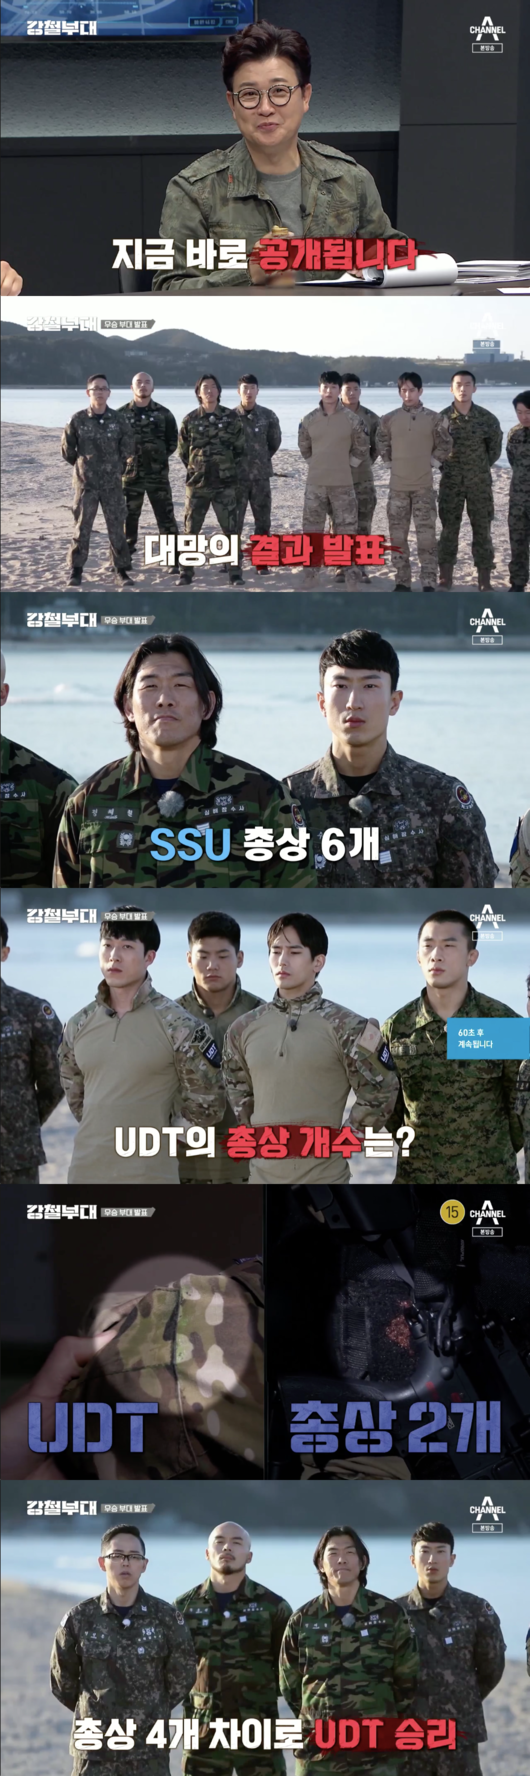 UDT won the final win of Steel Unit.In the 14th episode of Channel A and SKY Channels entertainment program Steel Unit (director Lee Won-woong / production channel A, SKY channel), which was broadcast on the 22nd, the final game, Operation Name Director, was won and lost.Two teams that started moving toward the infiltration point with Bomb. After removing a number of counter-forces, they were required to install Bomb.He started to commission UDT, heard the noise, and the counter forces came out of the building. Jung Jong-hyun climbed the cliff saying noise in a slow way.The two groups were searched and planned to meet in the center. The communication equipment was found, and Kim Sang-wook immediately went to the rear boundary, and Yoo Joon-seo quickly installed Bomb.Before I activated the Bomb, I got a bag with The Notebook from the mobile counter forces on the first basement floor and returned to the Bomb installation location and received an additional mission called Wind of the Bomb.It was hard to identify anything with the naked eye, said Kim Bum-seok, a UDT who moved to the perfect dark underground. Suddenly, counter-military forces appeared in the dark, and ruthless fire began.UDT, which found The Notebook, returned to the location of the Bomb installation and radioed the master, followed by a mission to activate Bomb and exit within three minutes.Kim Sang-wook was shot and wounded. The crew pulled out a stretcher, laid Kim Sang-wook down and quickly removed him.The additional mission to move to B-dong was carried out. After Kim Sang-wook was discovered by the counter-military, he moved to the third floor with Kim Sang-wook.They shot the counter-force boss and got a line of troops hanging around his neck. They were told to go up to the roof and exit within five minutes.The SSUs Operation Name Director. Kim Min-soo said, Every mission we think we are professionals and tried to prove it.We will also net the final with our own way. Kim Hee-chul, who watched the monitor, said, Give me oxygen, I cant breathe. He added, The number of bullets makes the decision. Six bullets from SSU and two from UDT.UDT won the steel unit by four totals.I think I personally had a lot of troubles, but I feel good because I have had the beauty of my own kind, said Yoo.Im very happy to win once, said Chung.I think it is time to support the steel unit so that I can feel the academic achievement feeling beyond the fear, fierce and fearful, and feel such pleasure. steel unit broadcast screen capture